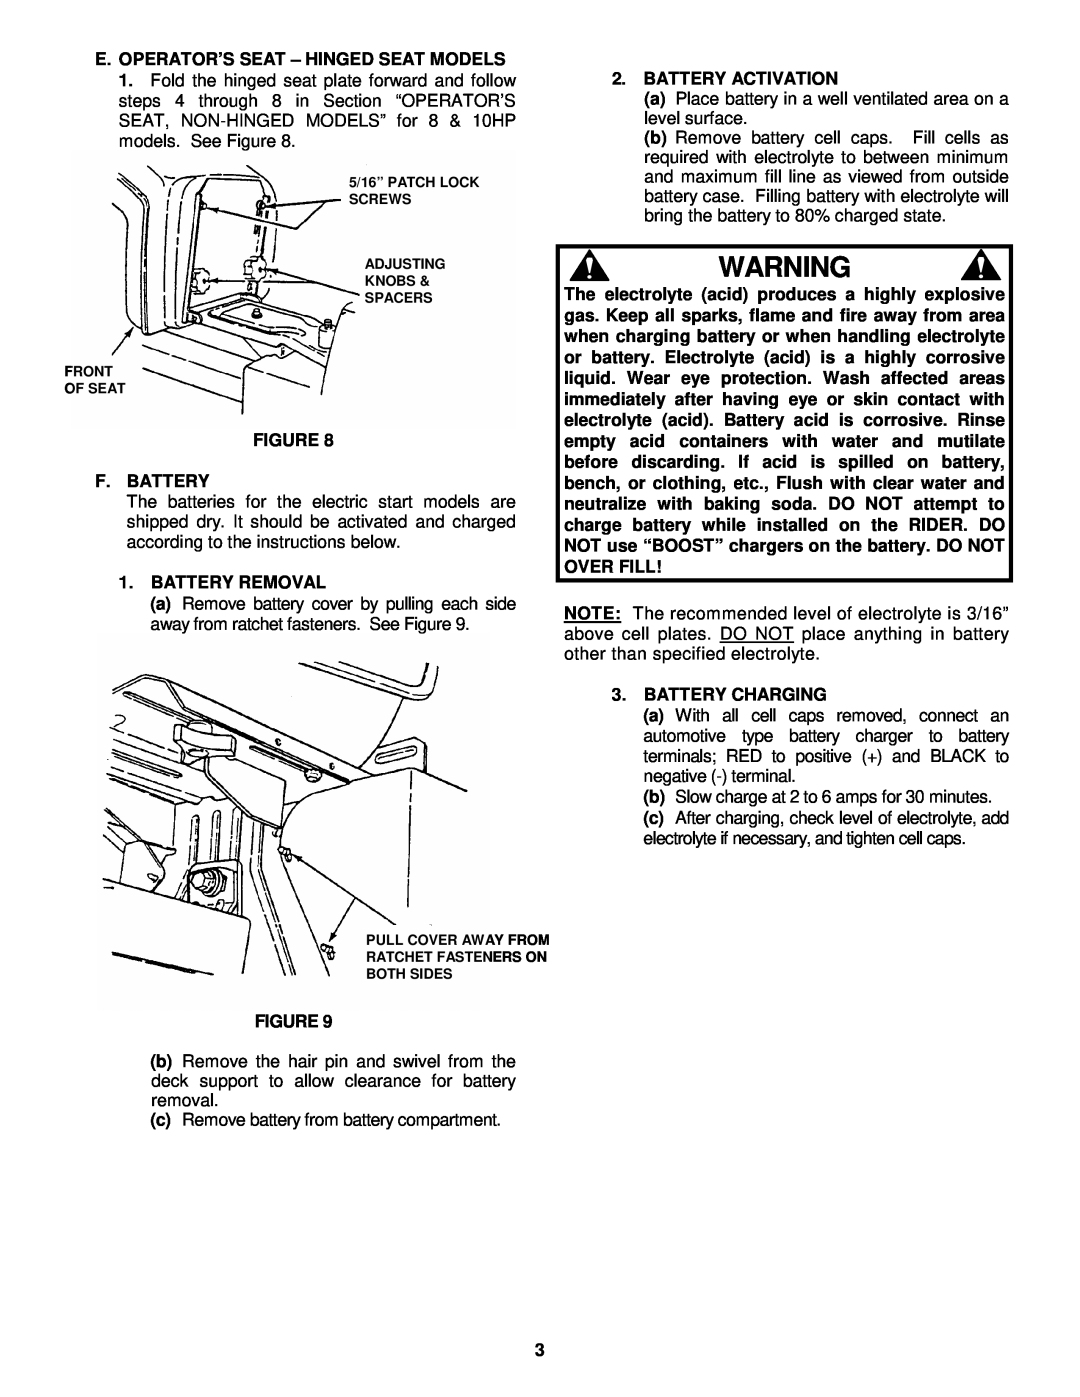 Snapper Rear Engine Riders manual E.Operator’S Seat - Hinged Seat Models 